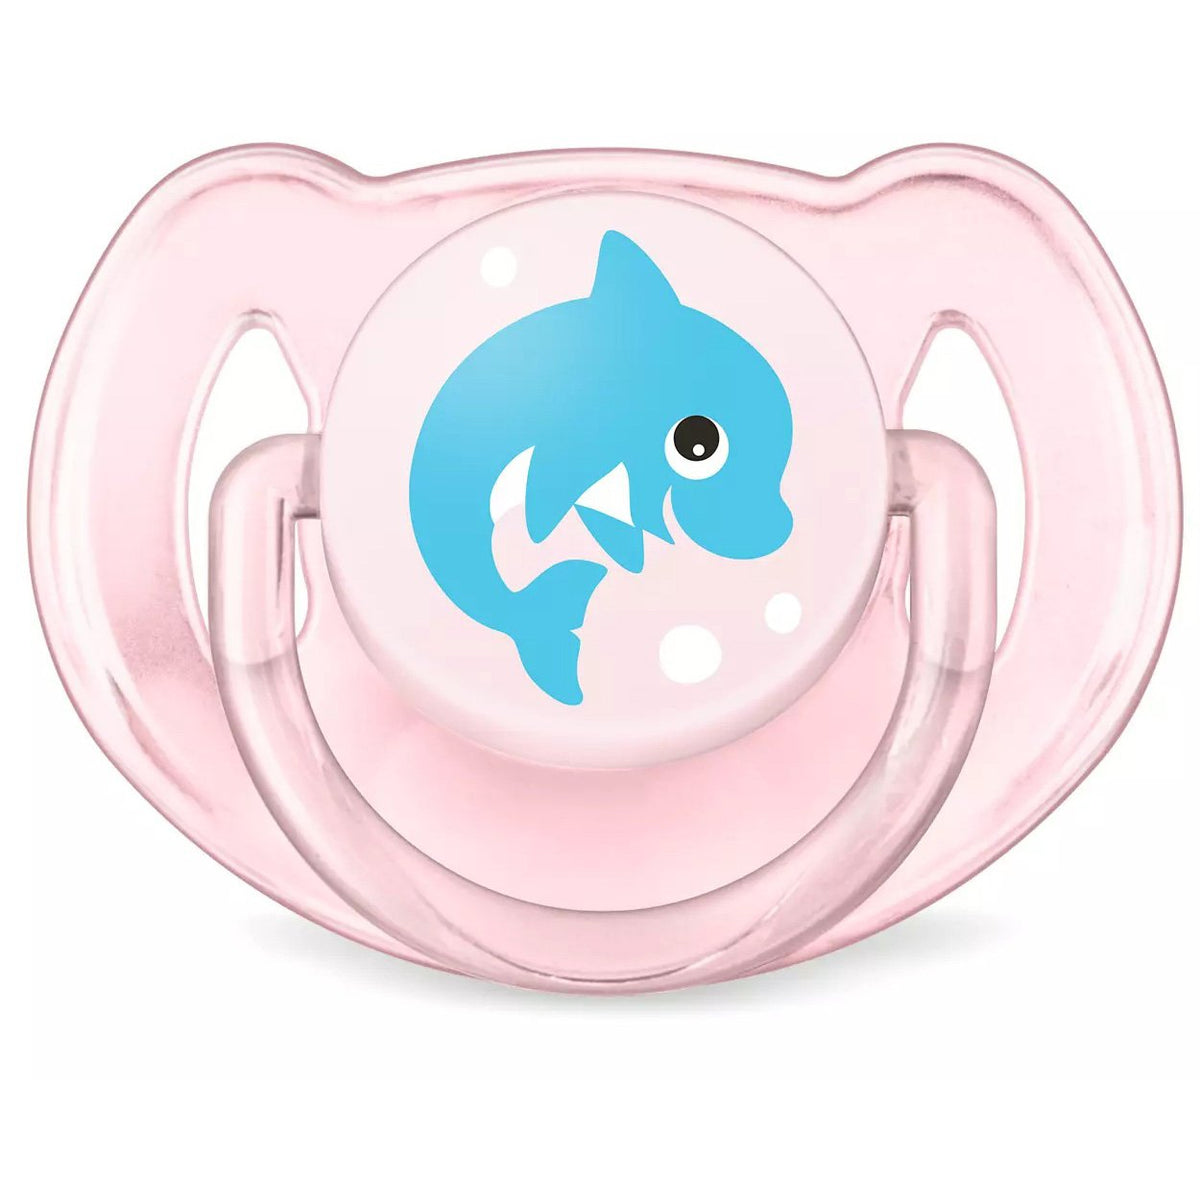 philips-avent-classic-pacifier- (3)